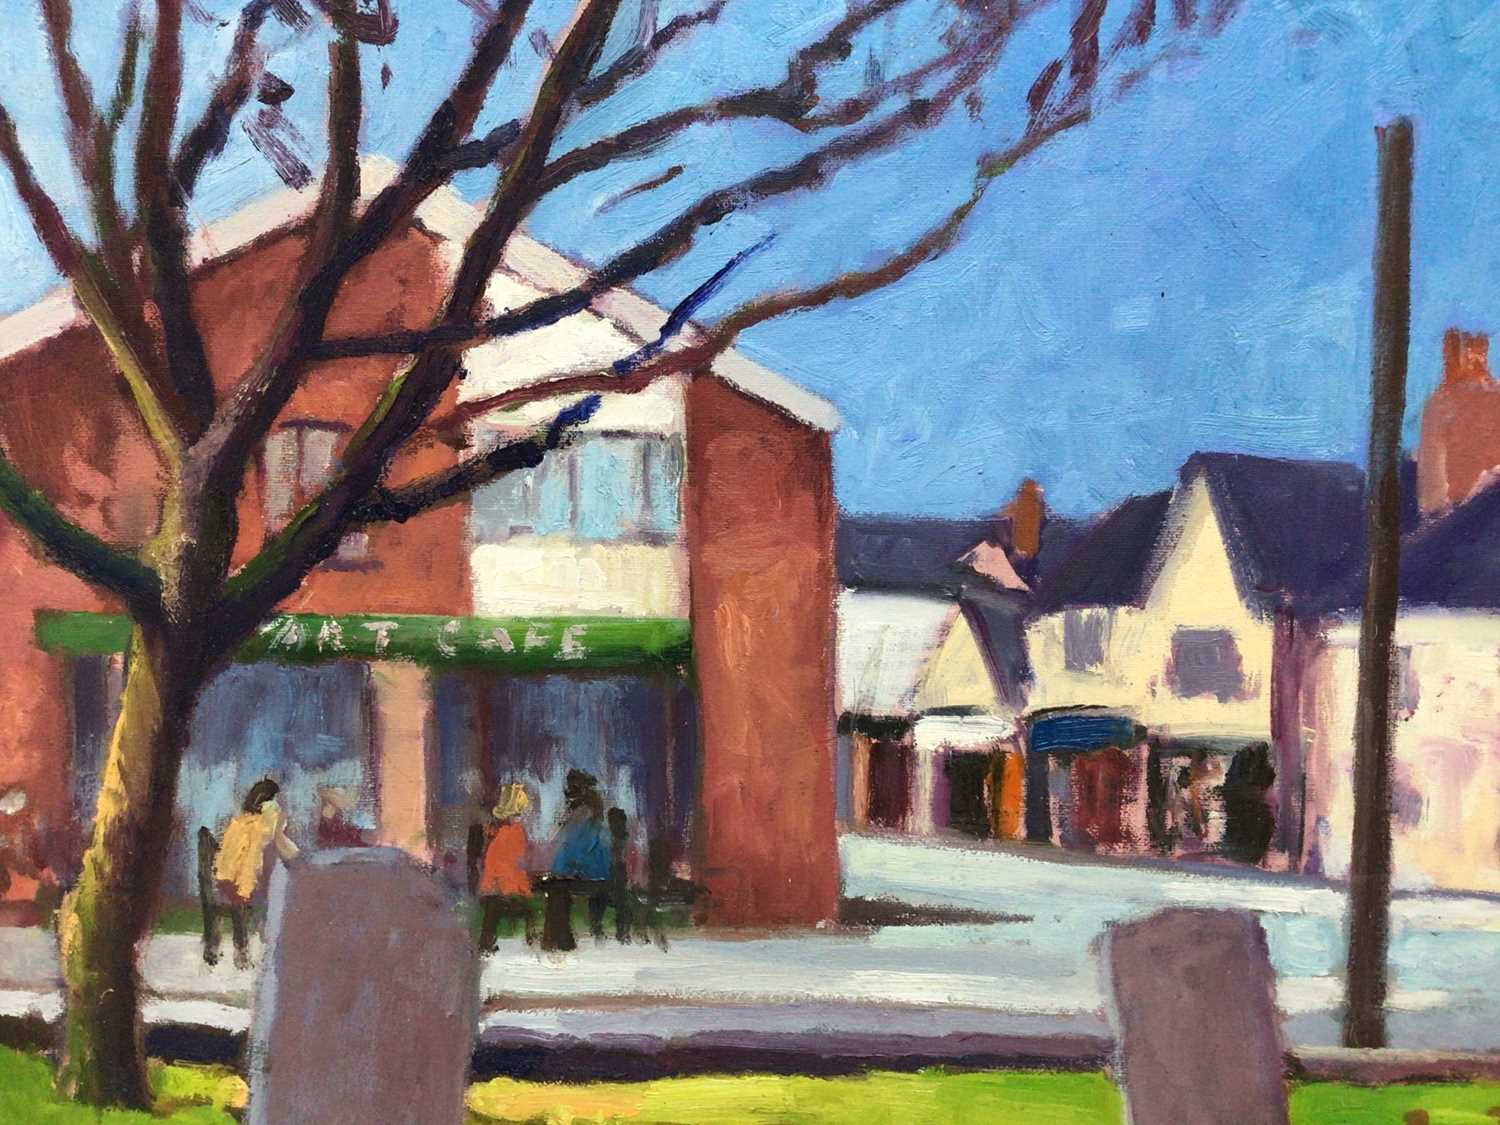 Lot 79 - David Britton, contemporary, oil on canvas - Art Cafe, Mersea, signed, framed, 46cm x 61cm